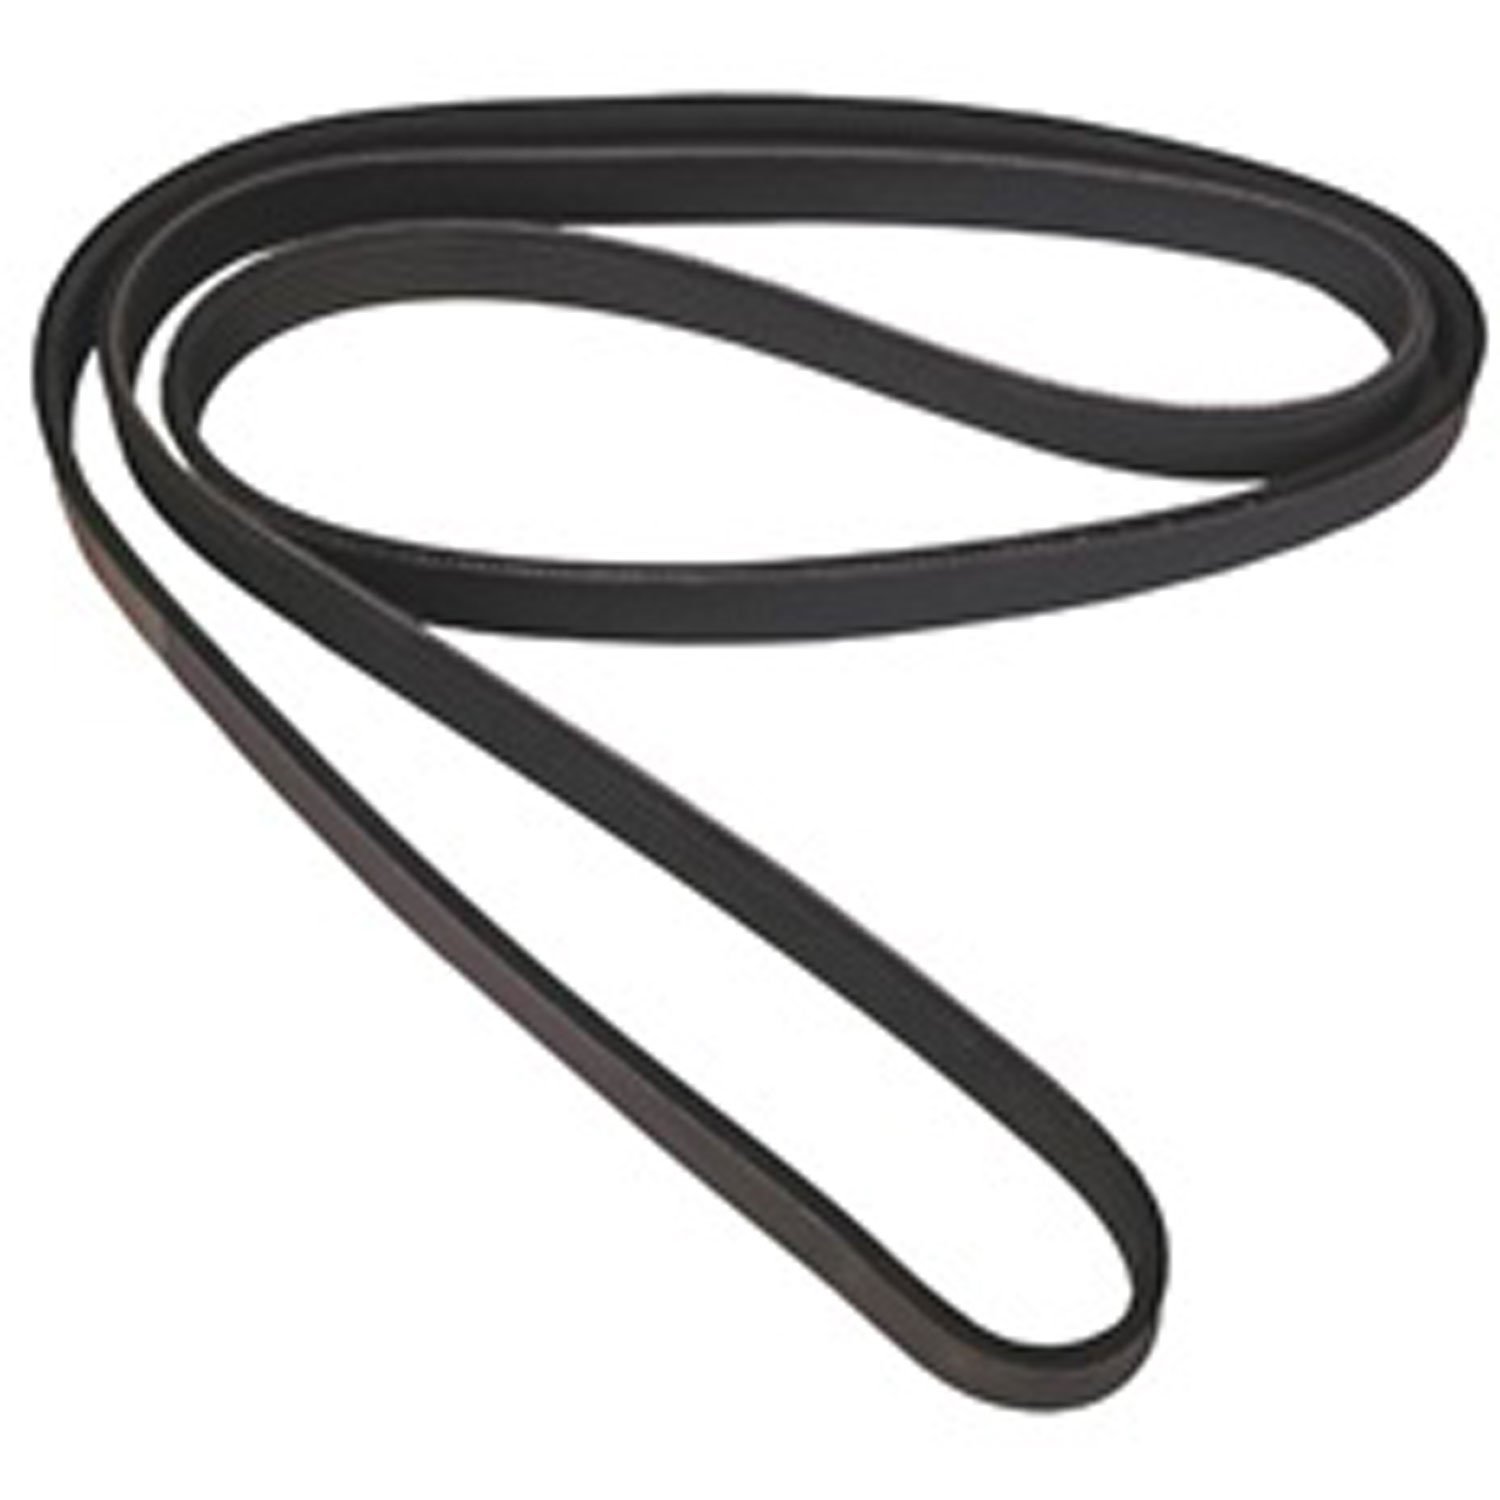 Stock replacement serpentine belt from Omix-ADA, Fits 99-04 Jeep Grand Cherokee WJ and 00-06 TJ Wrangler See details.